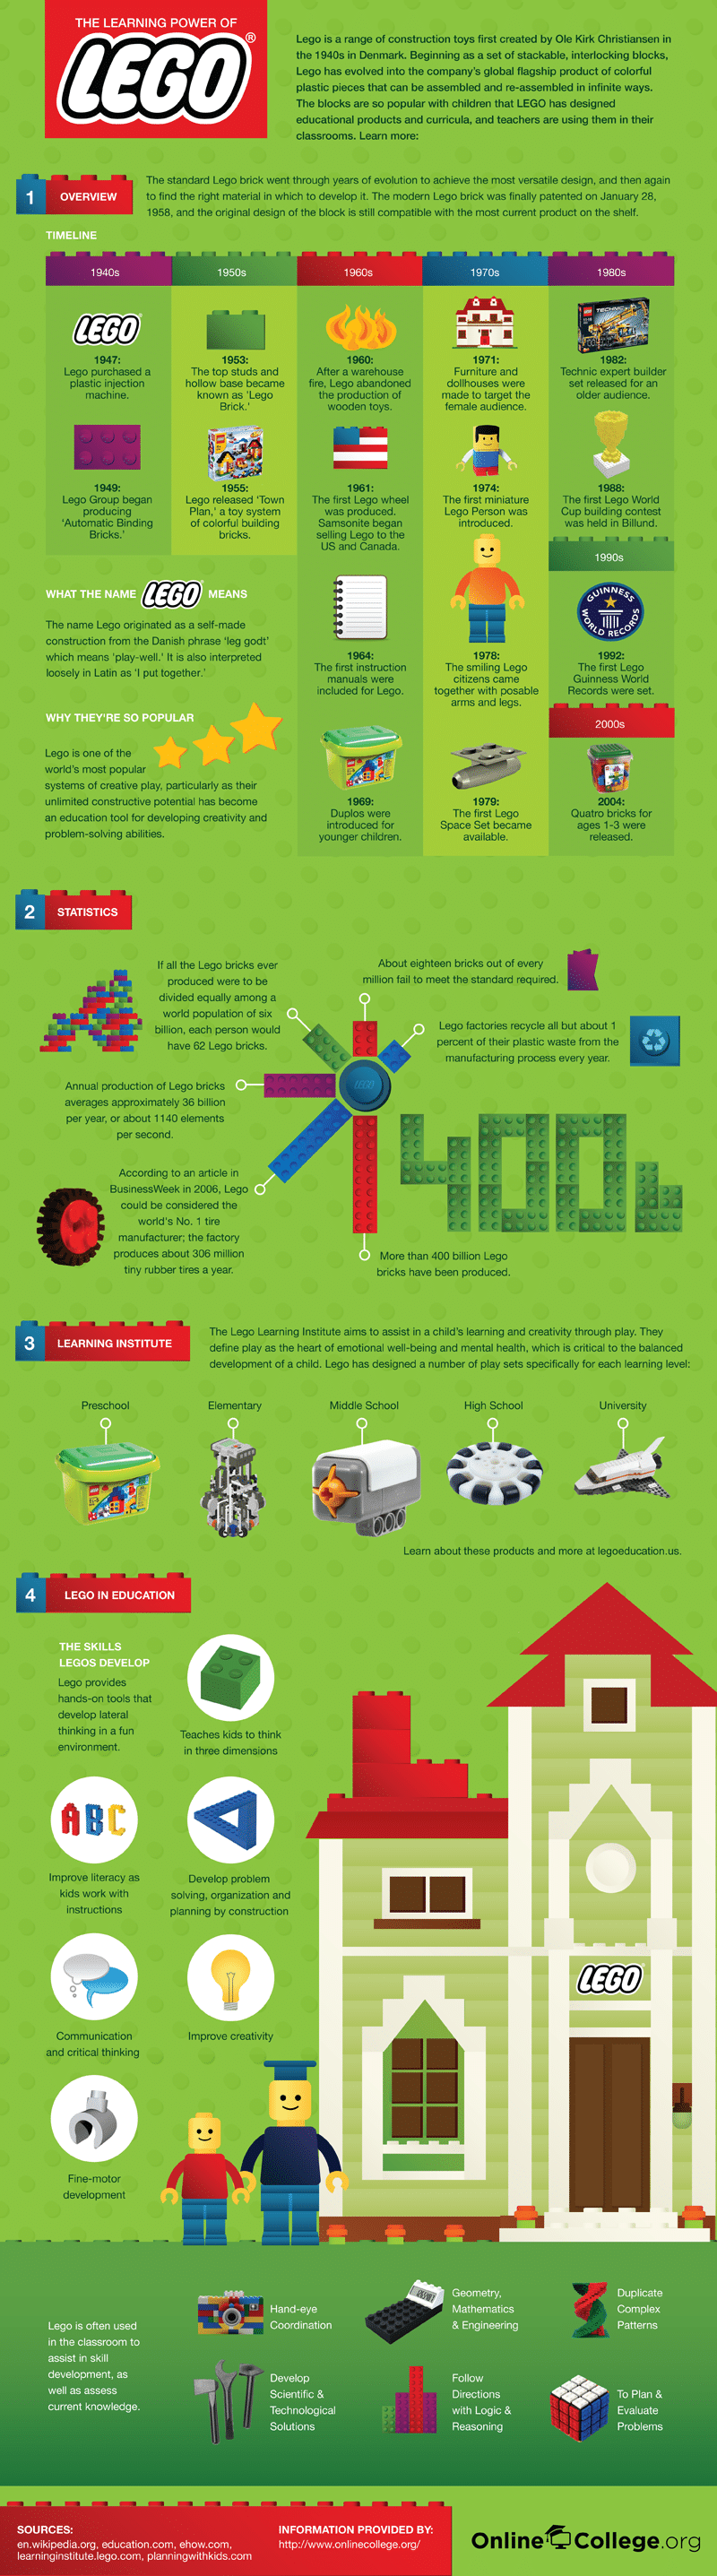 The Learning Power Of Lego [Infographic]